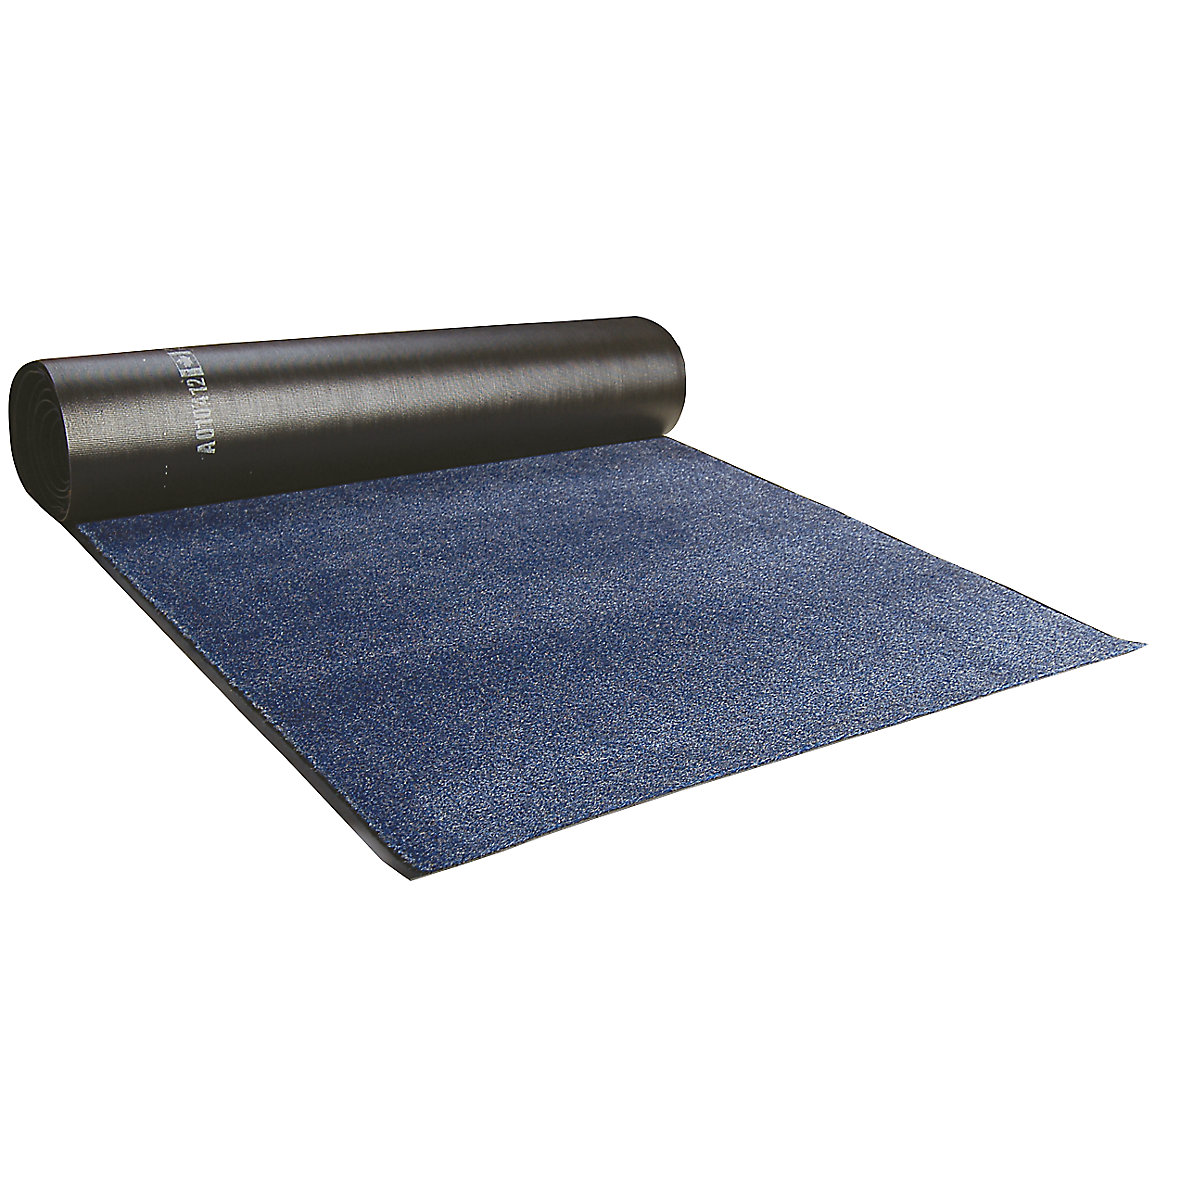 EAZYCARE AQUA entrance matting, width 900 mm, sold by the metre, blue